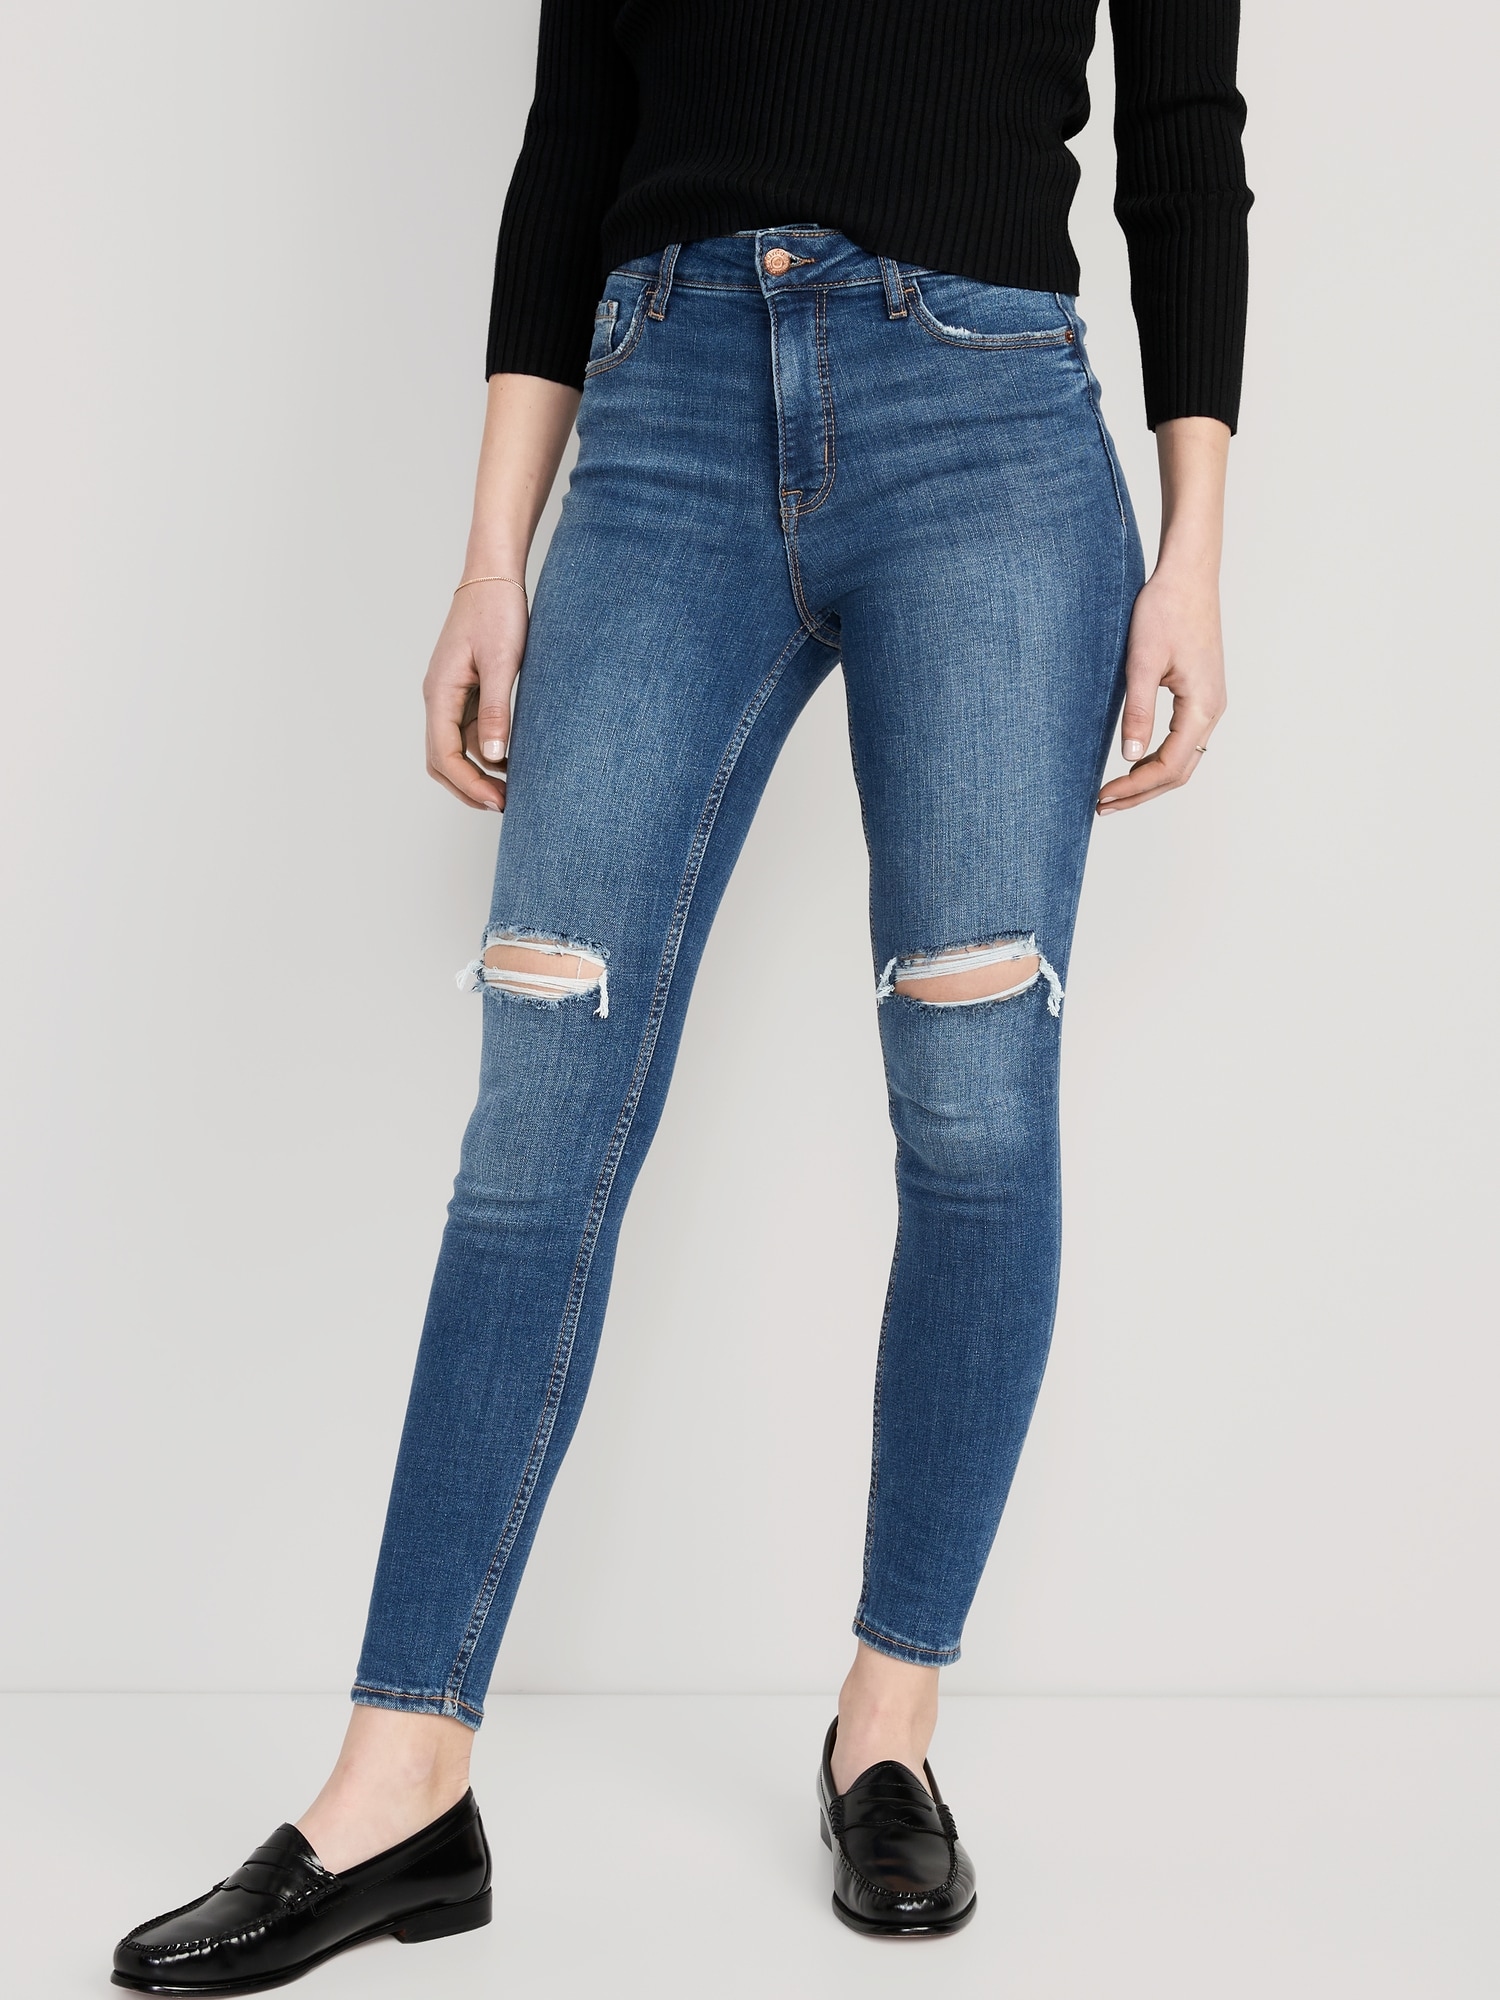 tobacco bouquet go sightseeing High-Waisted Rockstar Super-Skinny Ripped Jeans for Women | Old Navy